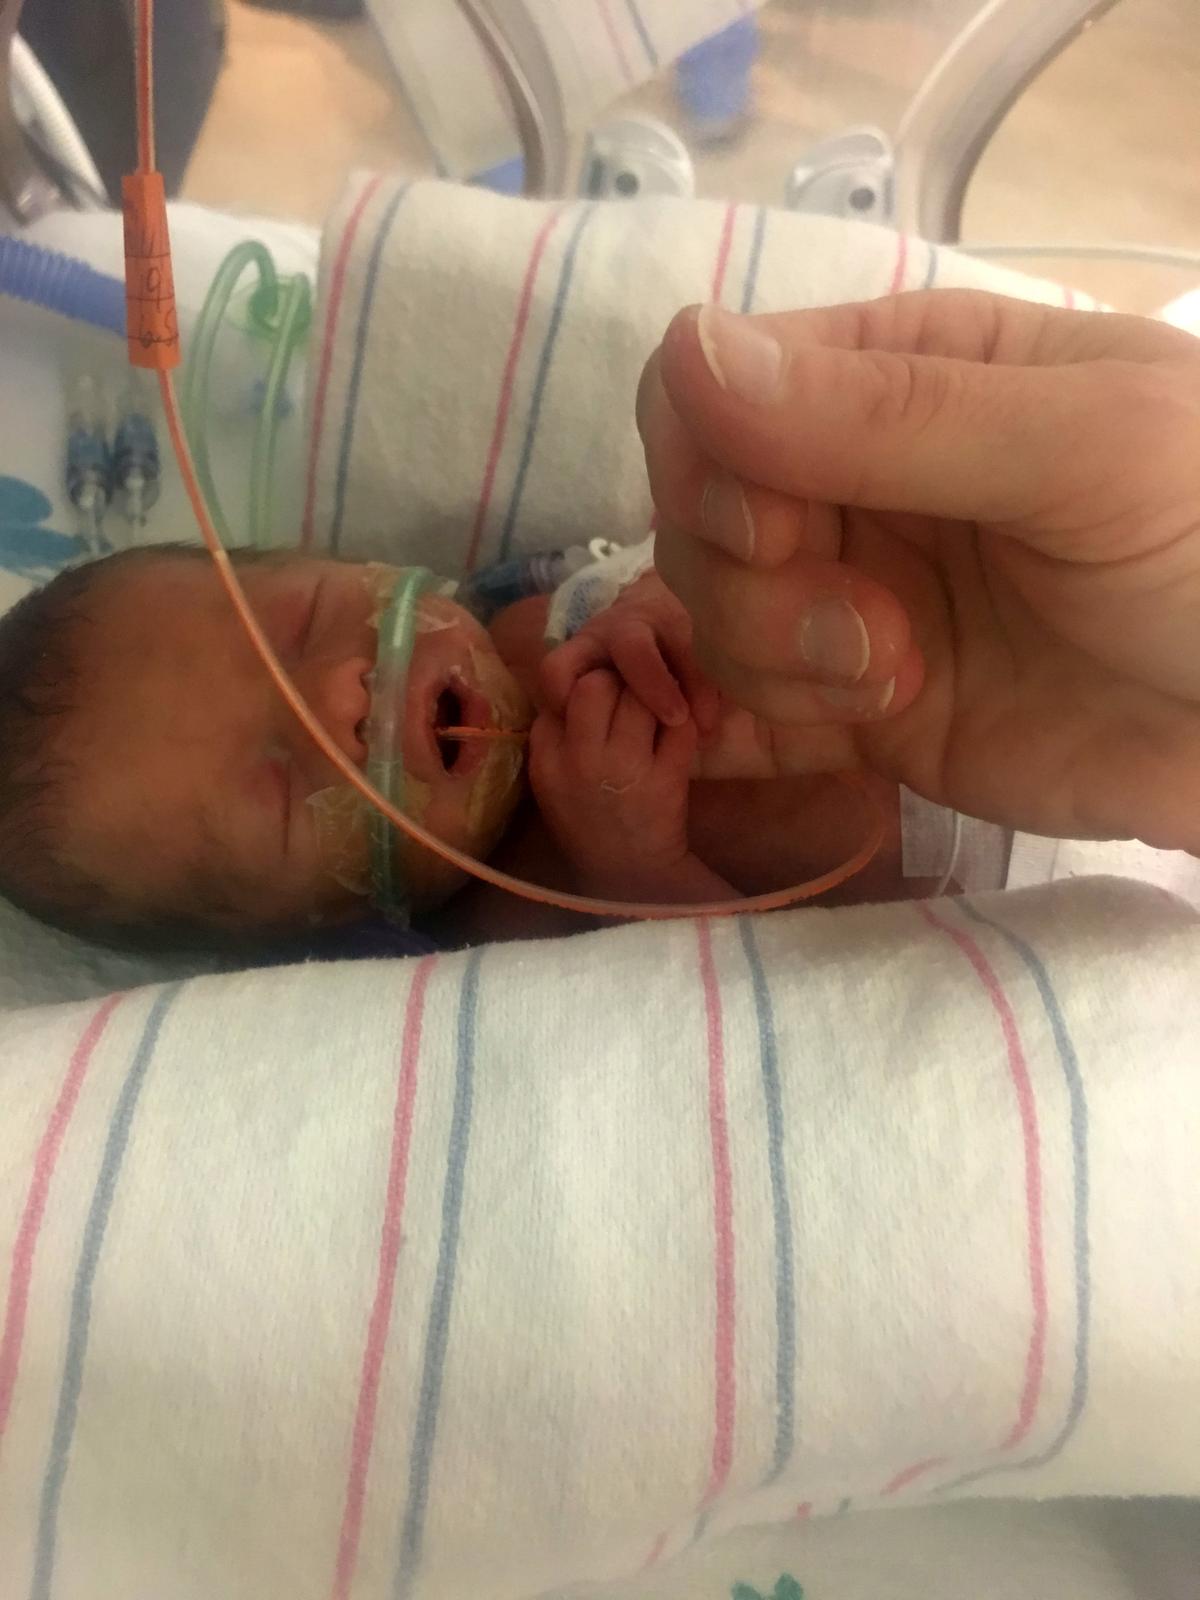 Jayden in the neonatal intensive care unit. (©SWNS)